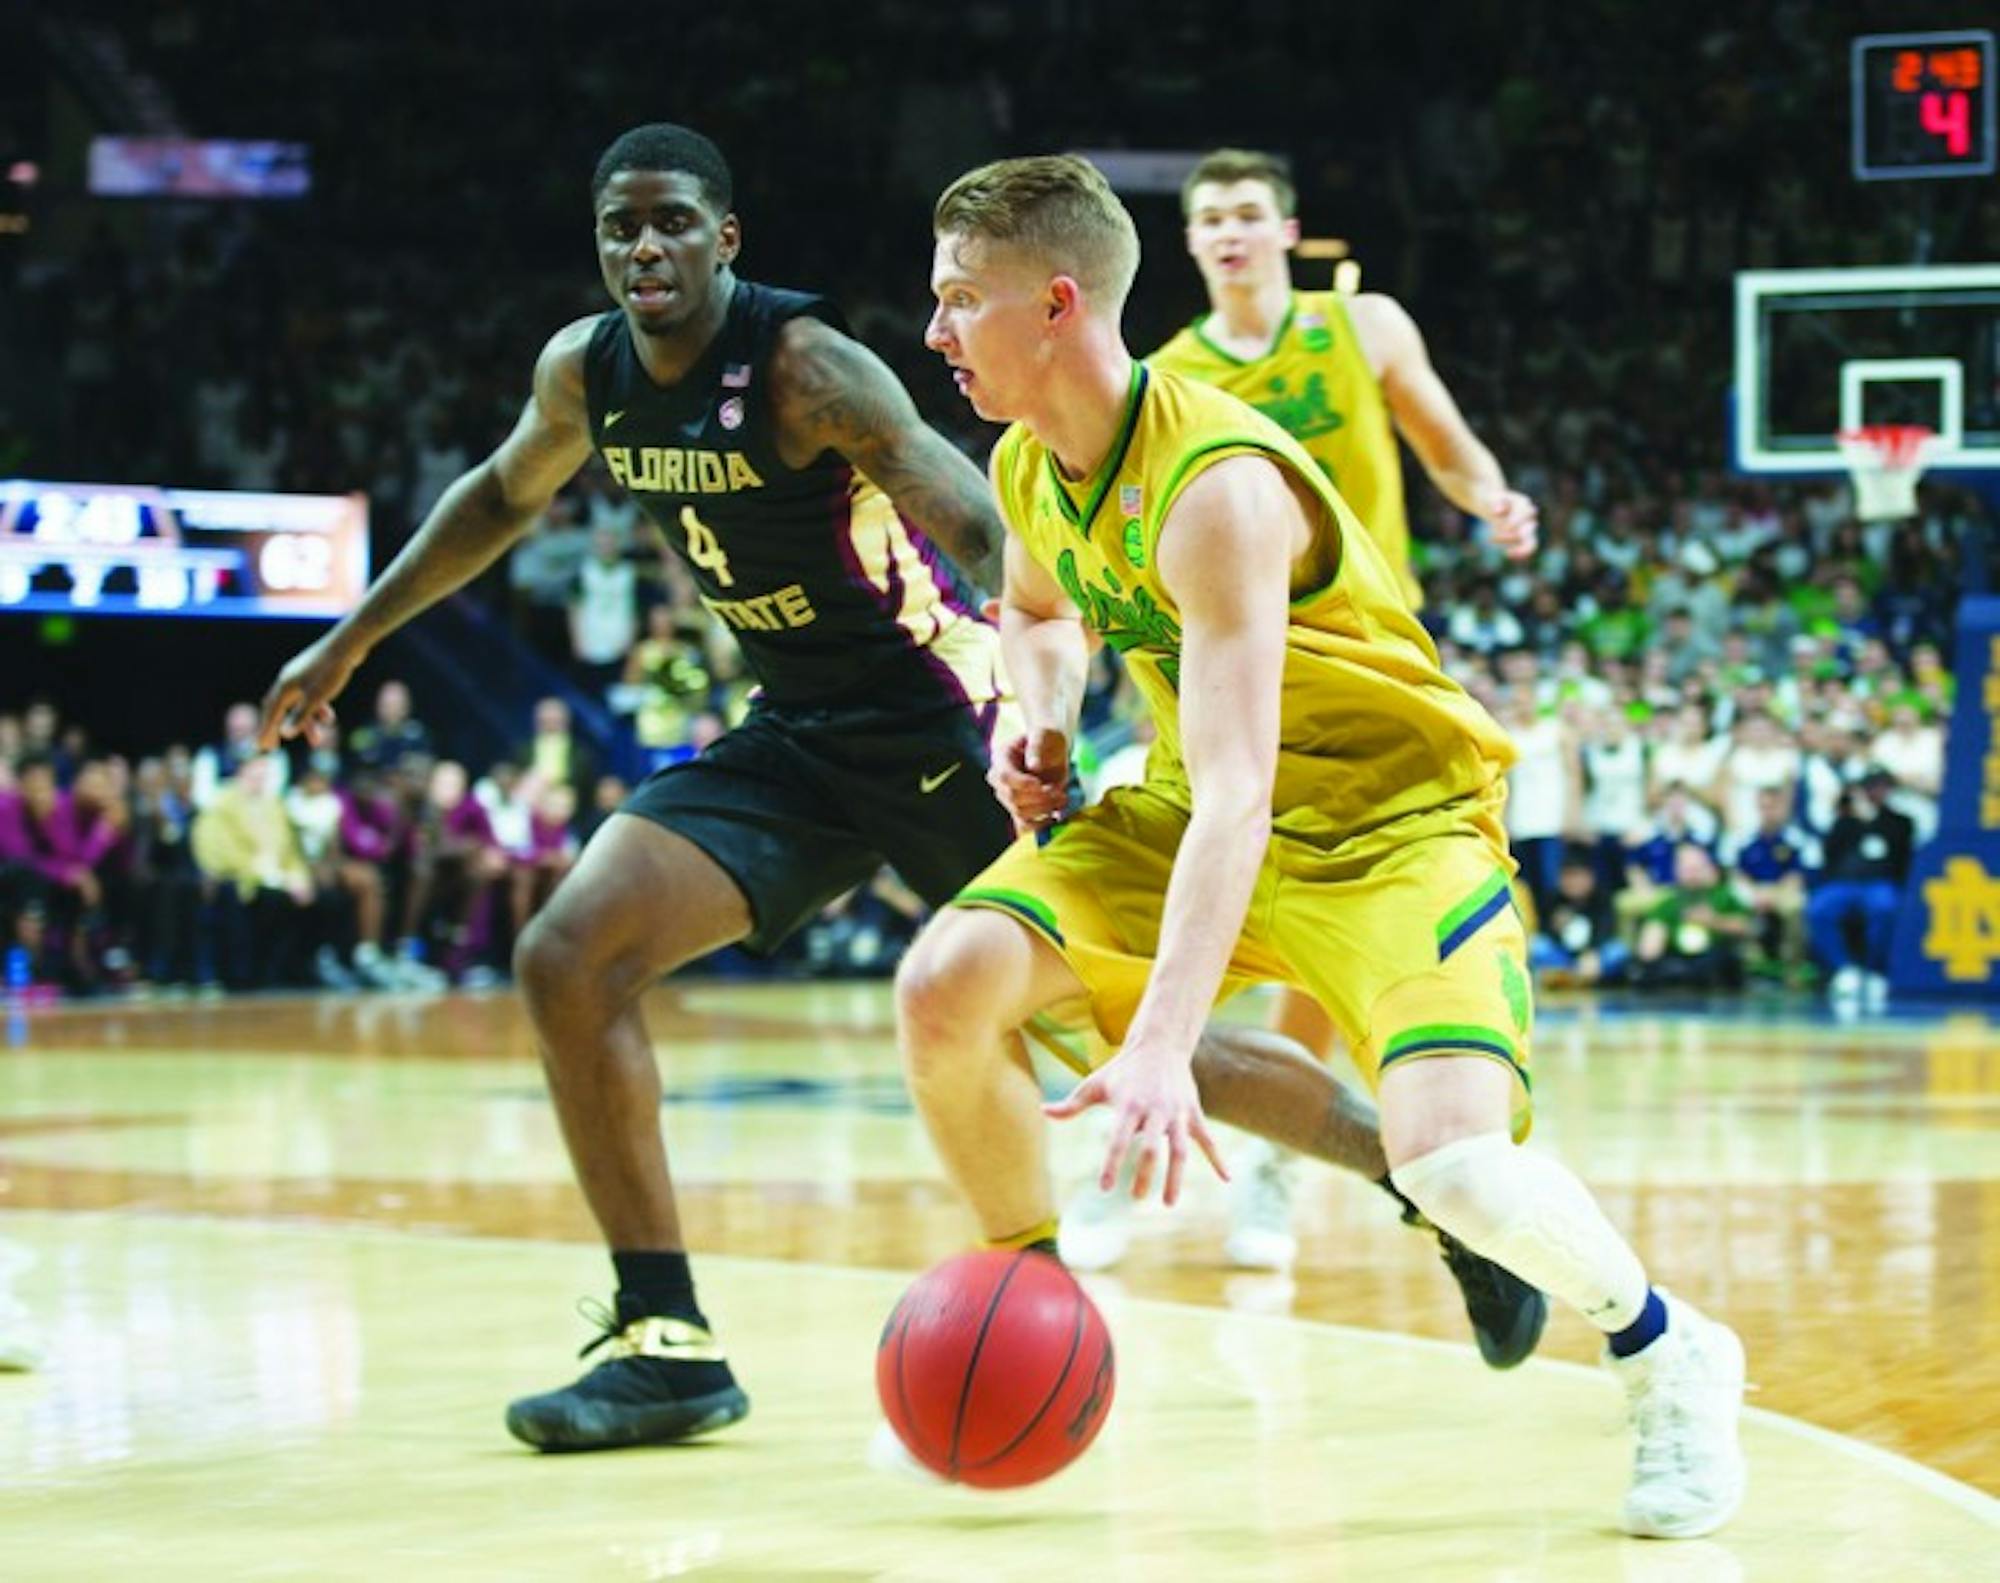 Irish sophomore guard Rex Pflueger dribbles past a Florida State defender during Notre Dame’s 84-72 victory Feb. 11 at Purcell Pavilion. Mike Brey said Pflueger would retain his starting spot this weekend.